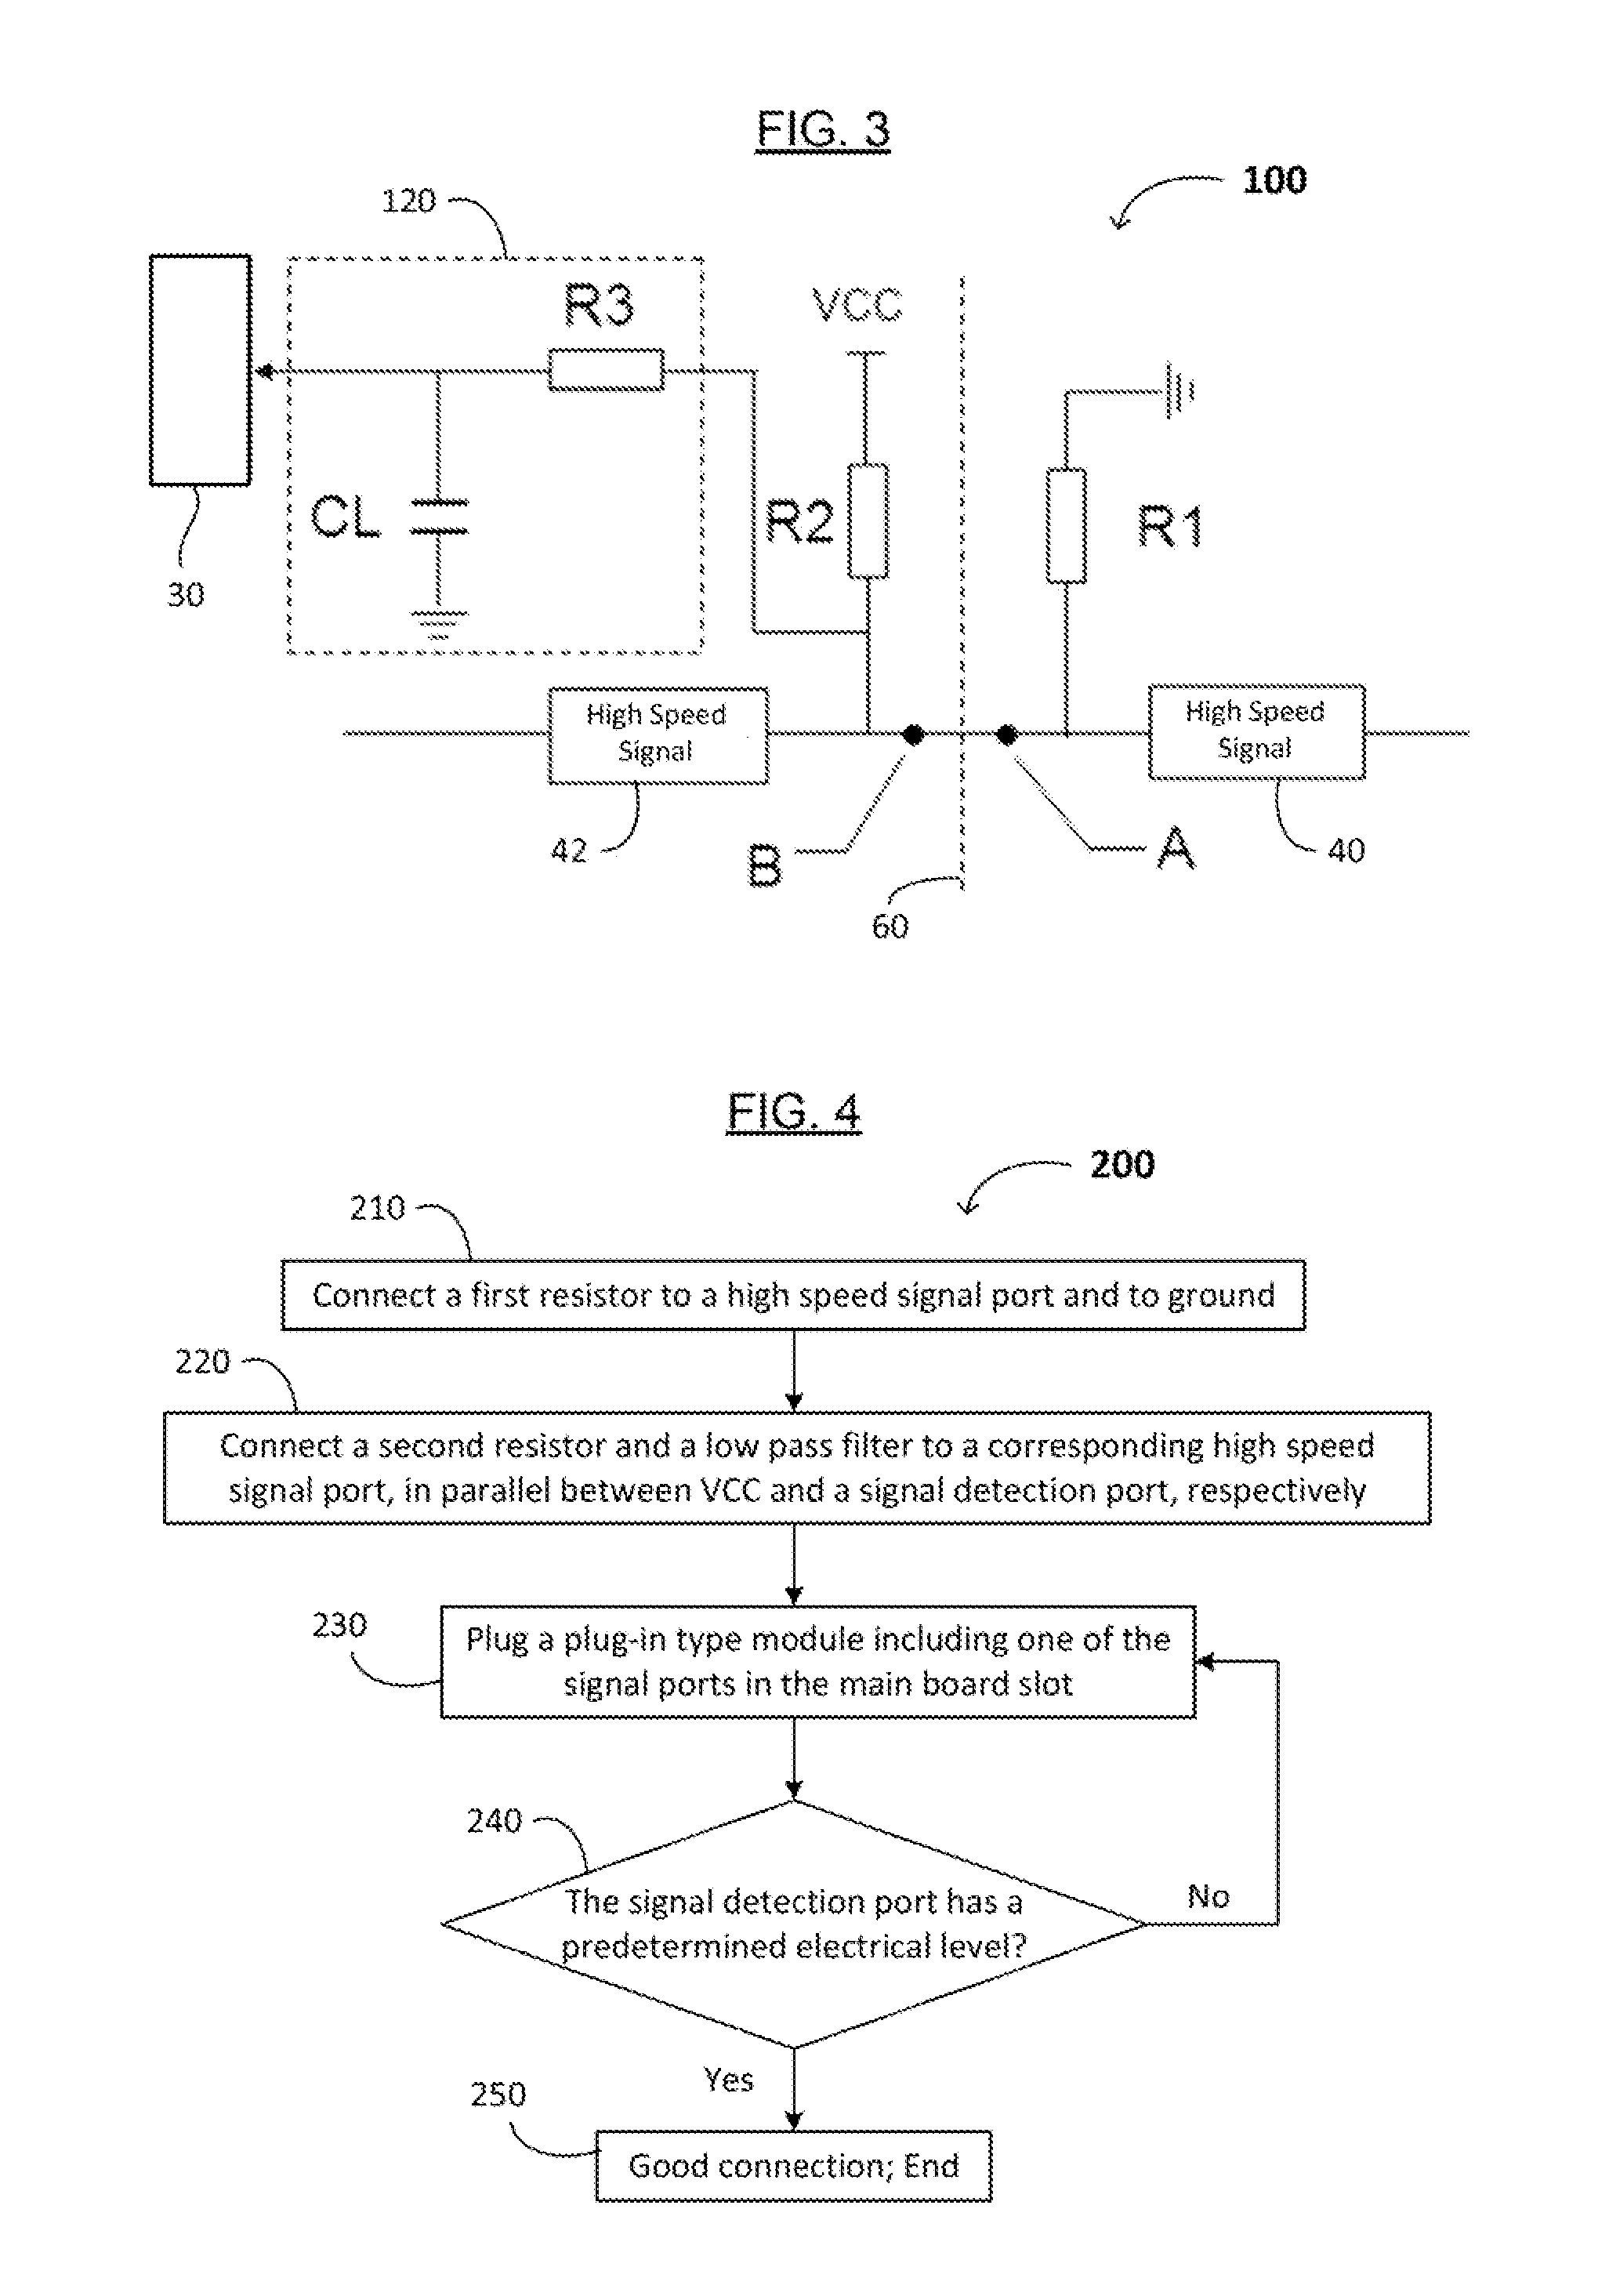 DC Level Detection Circuit Between High Speed Signal Line Connecting Ports, A System Including the Circuit, and Methods of Making and Using the Same